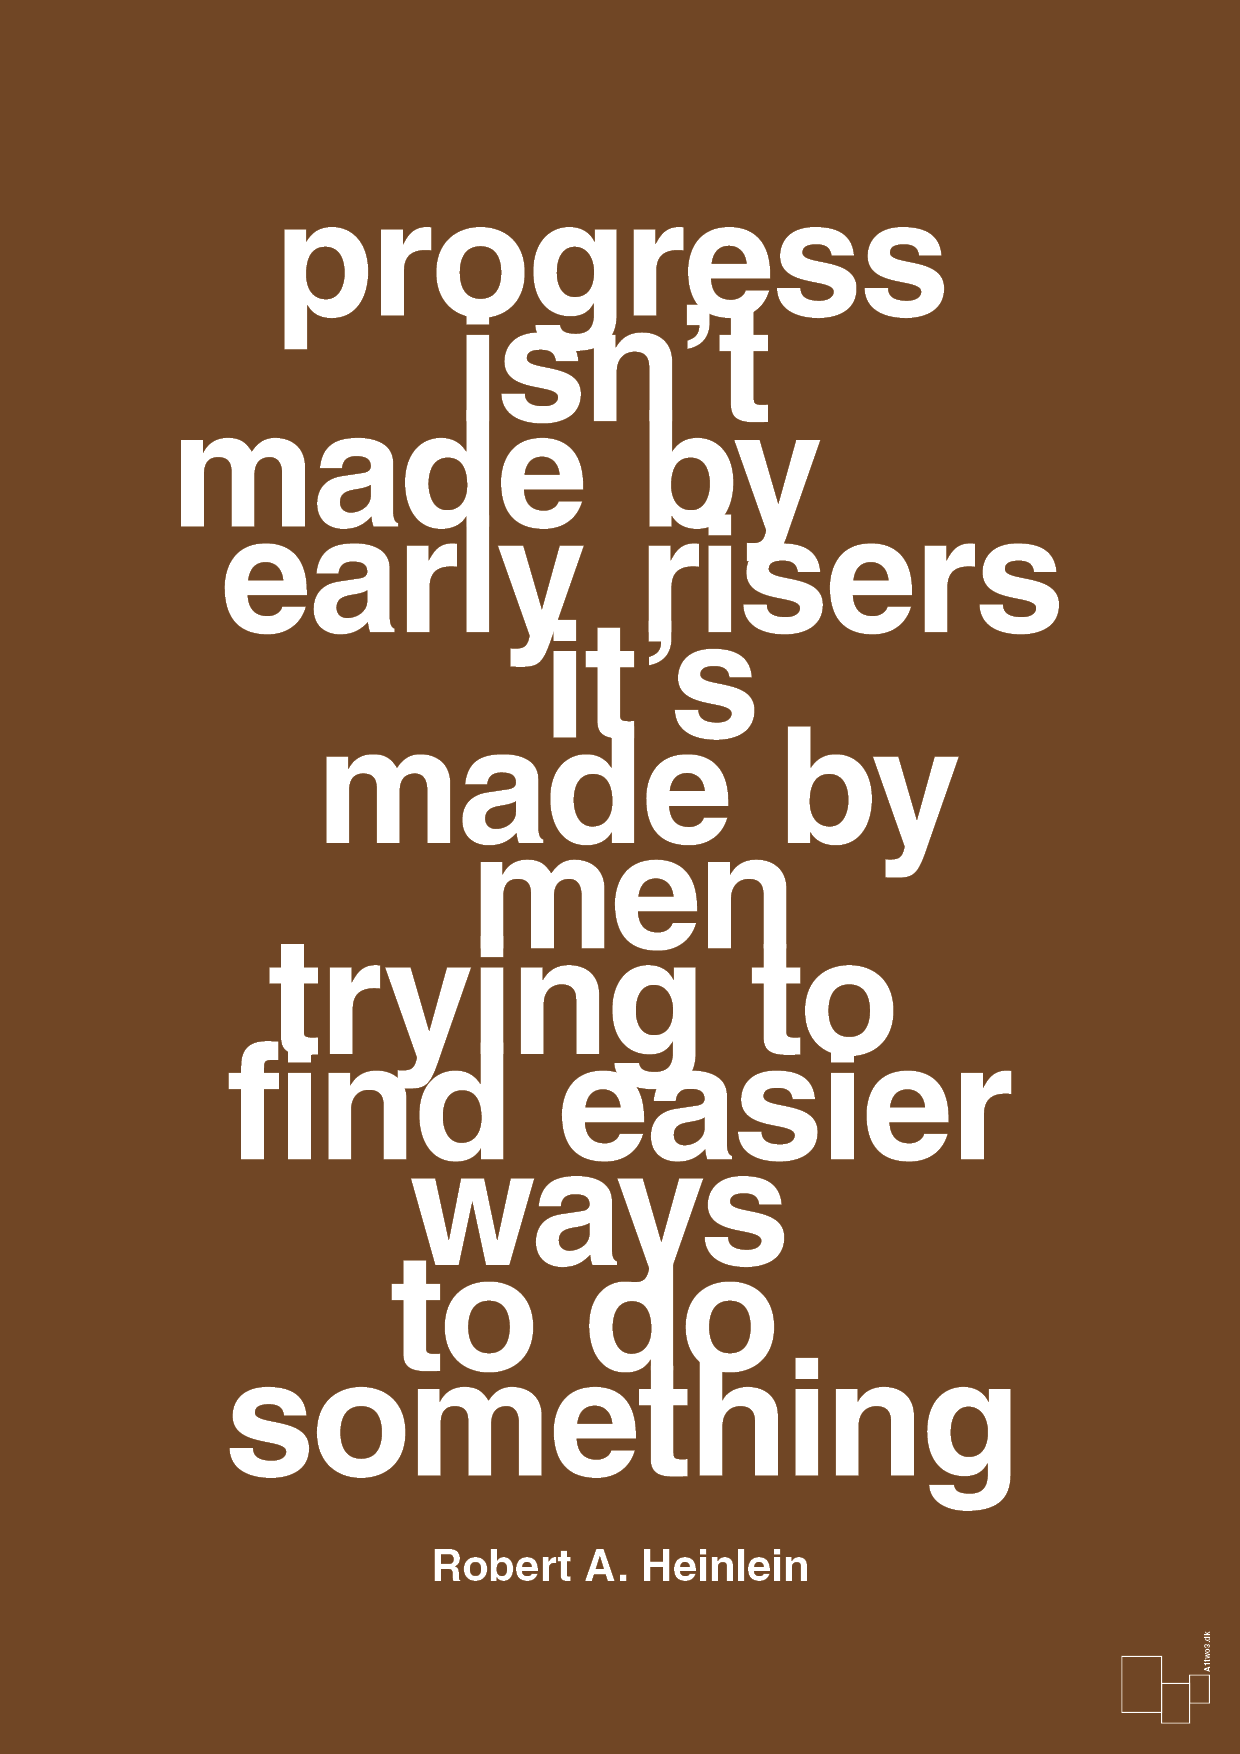 progress isnt made by early risers - Plakat med Citater i Dark Brown